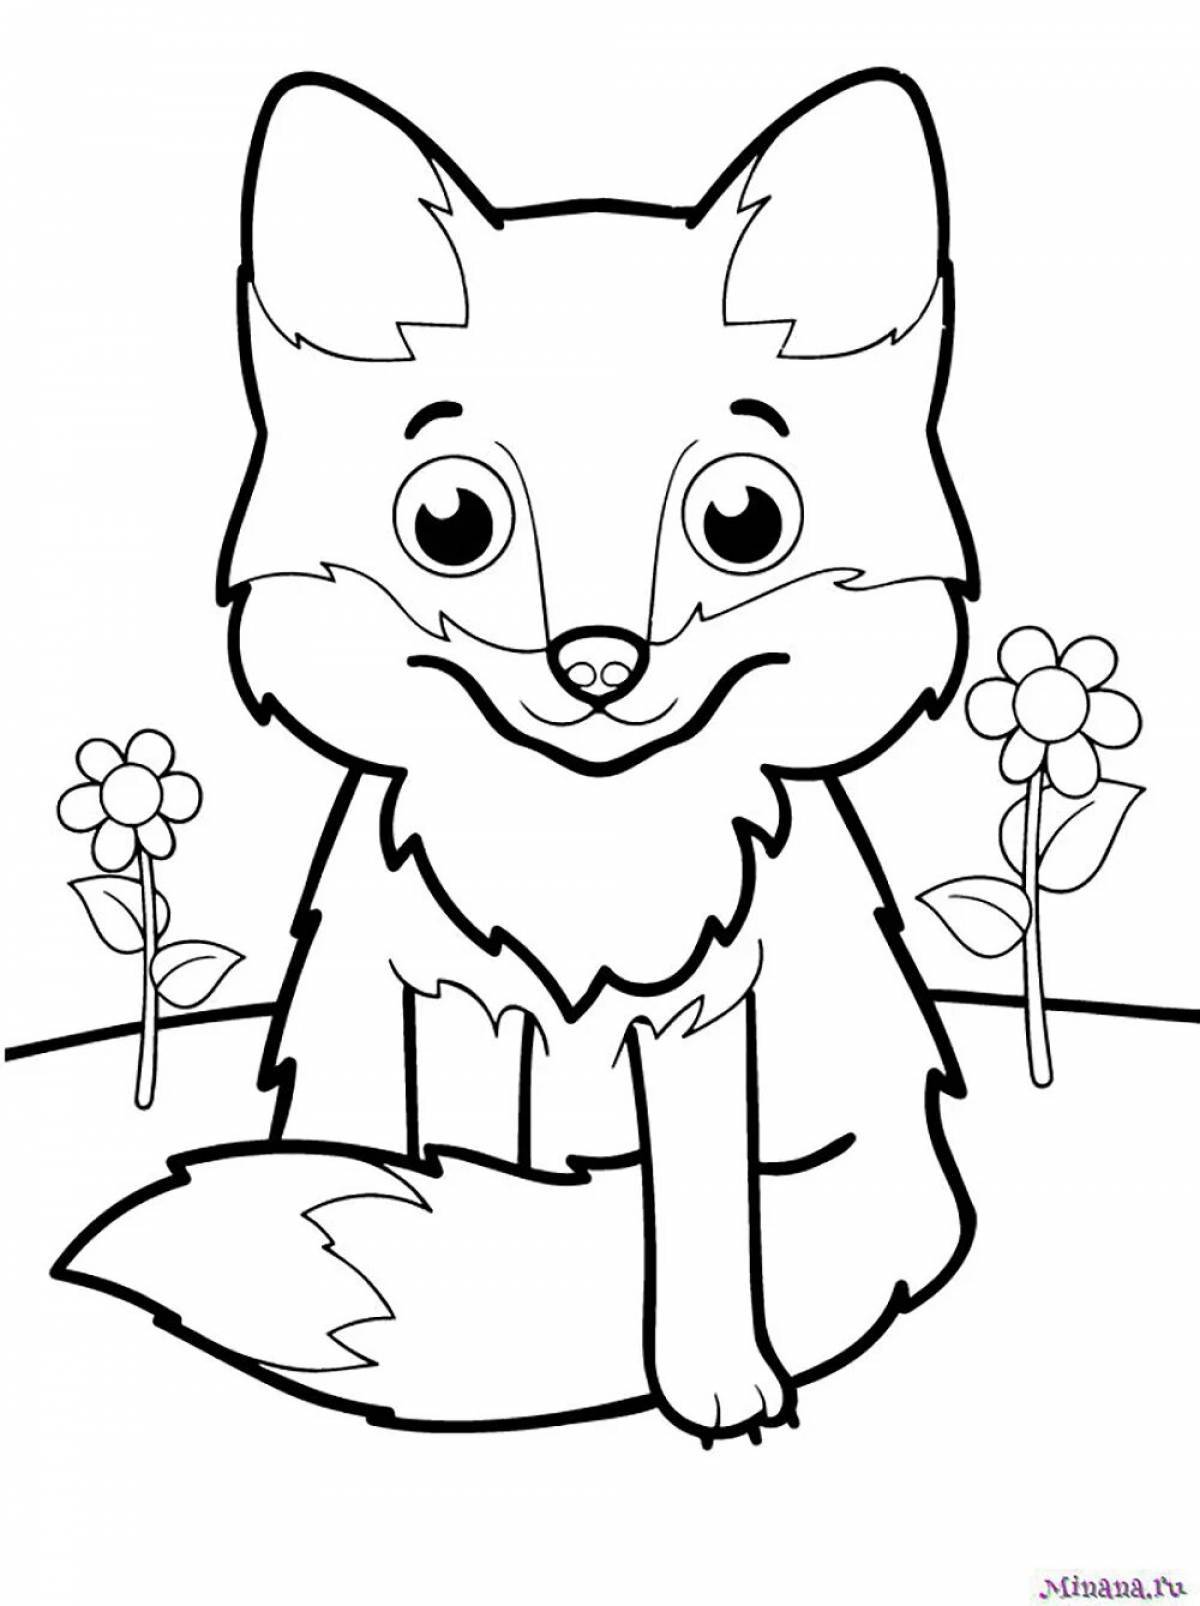 Coloring book joyful fox for children 3-4 years old